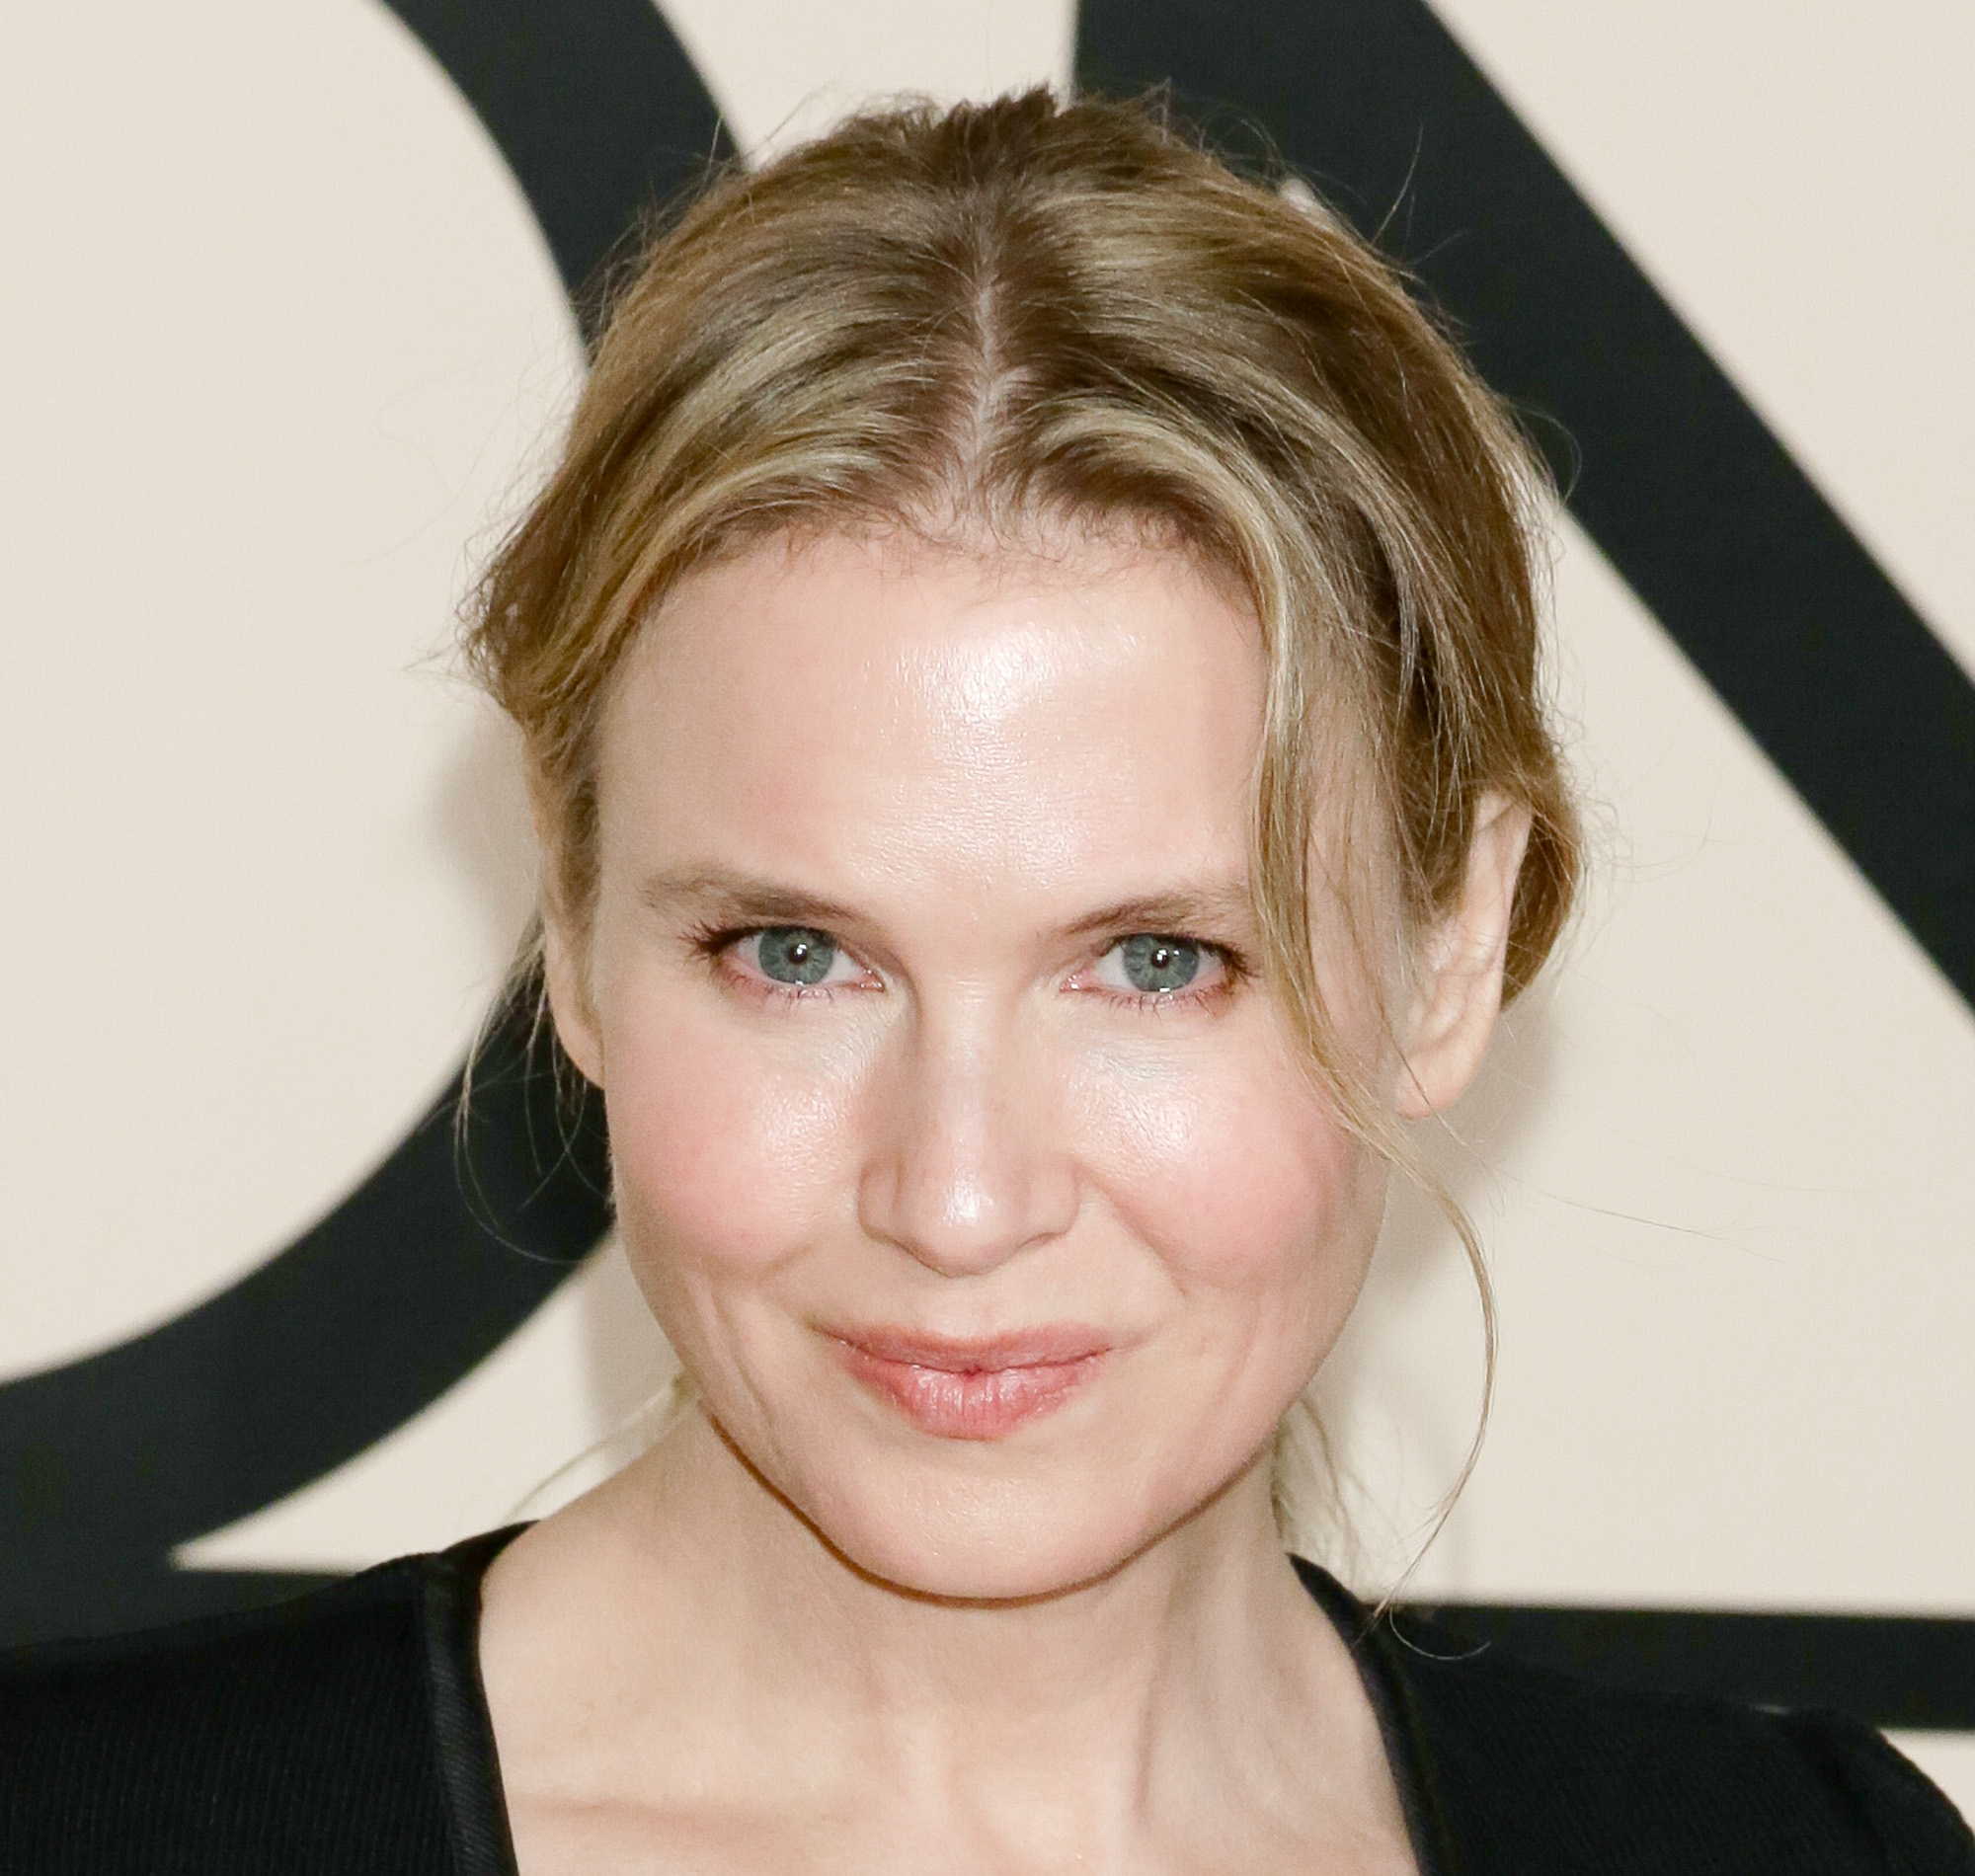 Renee Zellweger Facelift Plastic Surgery Before and After | Celebie2000 x 1900